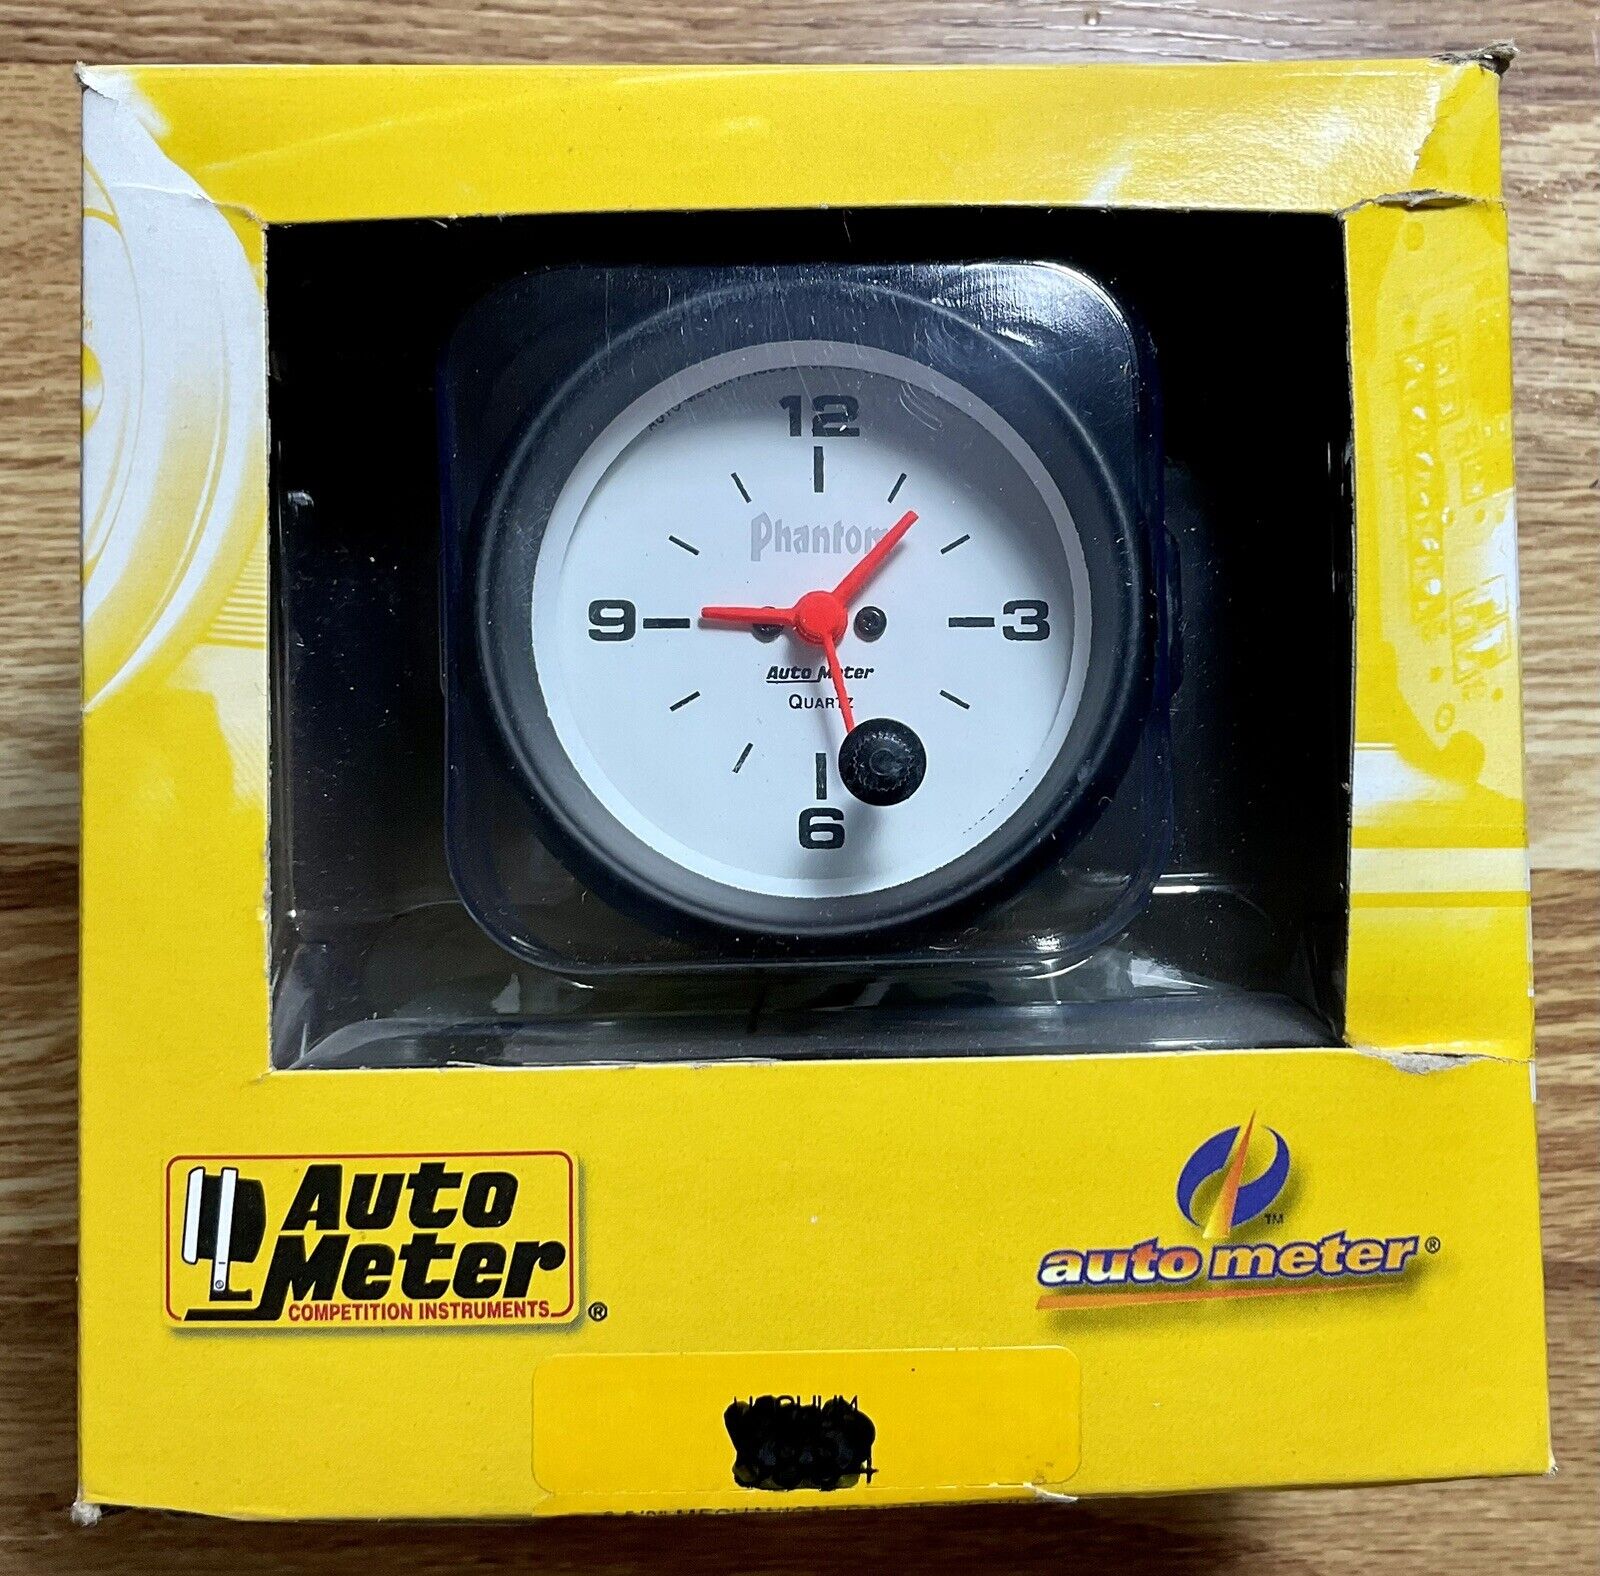 AUTOMETER Phantom *2 5/8” Clock Model *5885* *Made in USA* *Fast Shipping*